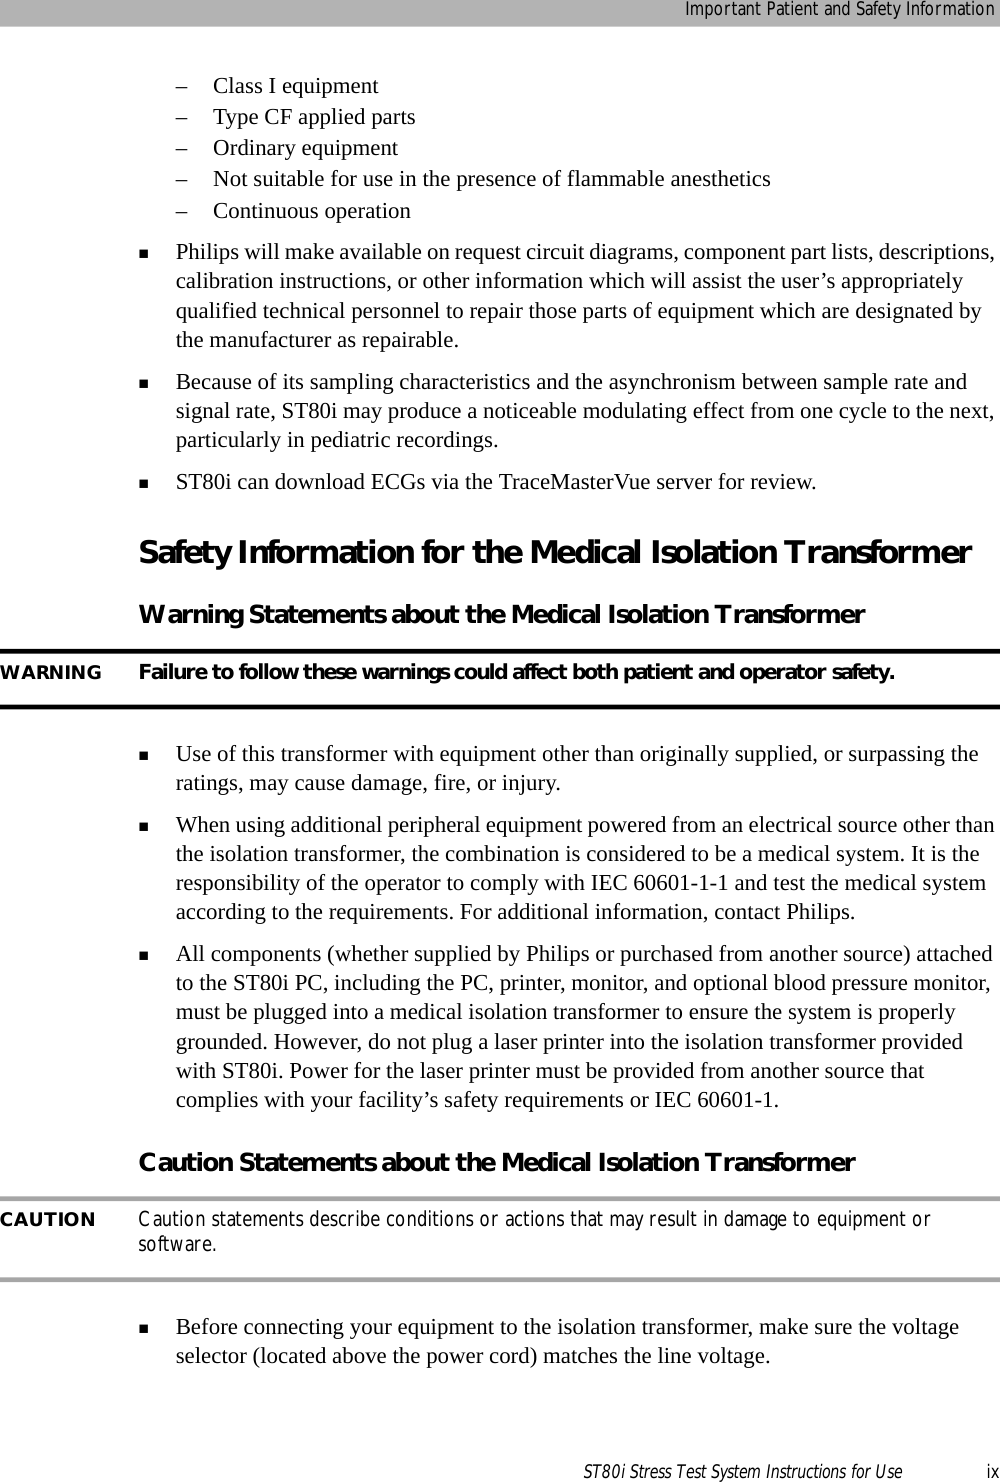 Important Patient and Safety InformationST80i Stress Test System Instructions for Use ix– Class I equipment– Type CF applied parts– Ordinary equipment– Not suitable for use in the presence of flammable anesthetics– Continuous operationPhilips will make available on request circuit diagrams, component part lists, descriptions, calibration instructions, or other information which will assist the user’s appropriately qualified technical personnel to repair those parts of equipment which are designated by the manufacturer as repairable.Because of its sampling characteristics and the asynchronism between sample rate and signal rate, ST80i may produce a noticeable modulating effect from one cycle to the next, particularly in pediatric recordings.ST80i can download ECGs via the TraceMasterVue server for review.Safety Information for the Medical Isolation TransformerWarning Statements about the Medical Isolation TransformerWARNING Failure to follow these warnings could affect both patient and operator safety.Use of this transformer with equipment other than originally supplied, or surpassing the ratings, may cause damage, fire, or injury.When using additional peripheral equipment powered from an electrical source other than the isolation transformer, the combination is considered to be a medical system. It is the responsibility of the operator to comply with IEC 60601-1-1 and test the medical system according to the requirements. For additional information, contact Philips.All components (whether supplied by Philips or purchased from another source) attached to the ST80i PC, including the PC, printer, monitor, and optional blood pressure monitor, must be plugged into a medical isolation transformer to ensure the system is properly grounded. However, do not plug a laser printer into the isolation transformer provided with ST80i. Power for the laser printer must be provided from another source that complies with your facility’s safety requirements or IEC 60601-1.Caution Statements about the Medical Isolation TransformerCAUTION Caution statements describe conditions or actions that may result in damage to equipment or software.Before connecting your equipment to the isolation transformer, make sure the voltage selector (located above the power cord) matches the line voltage.